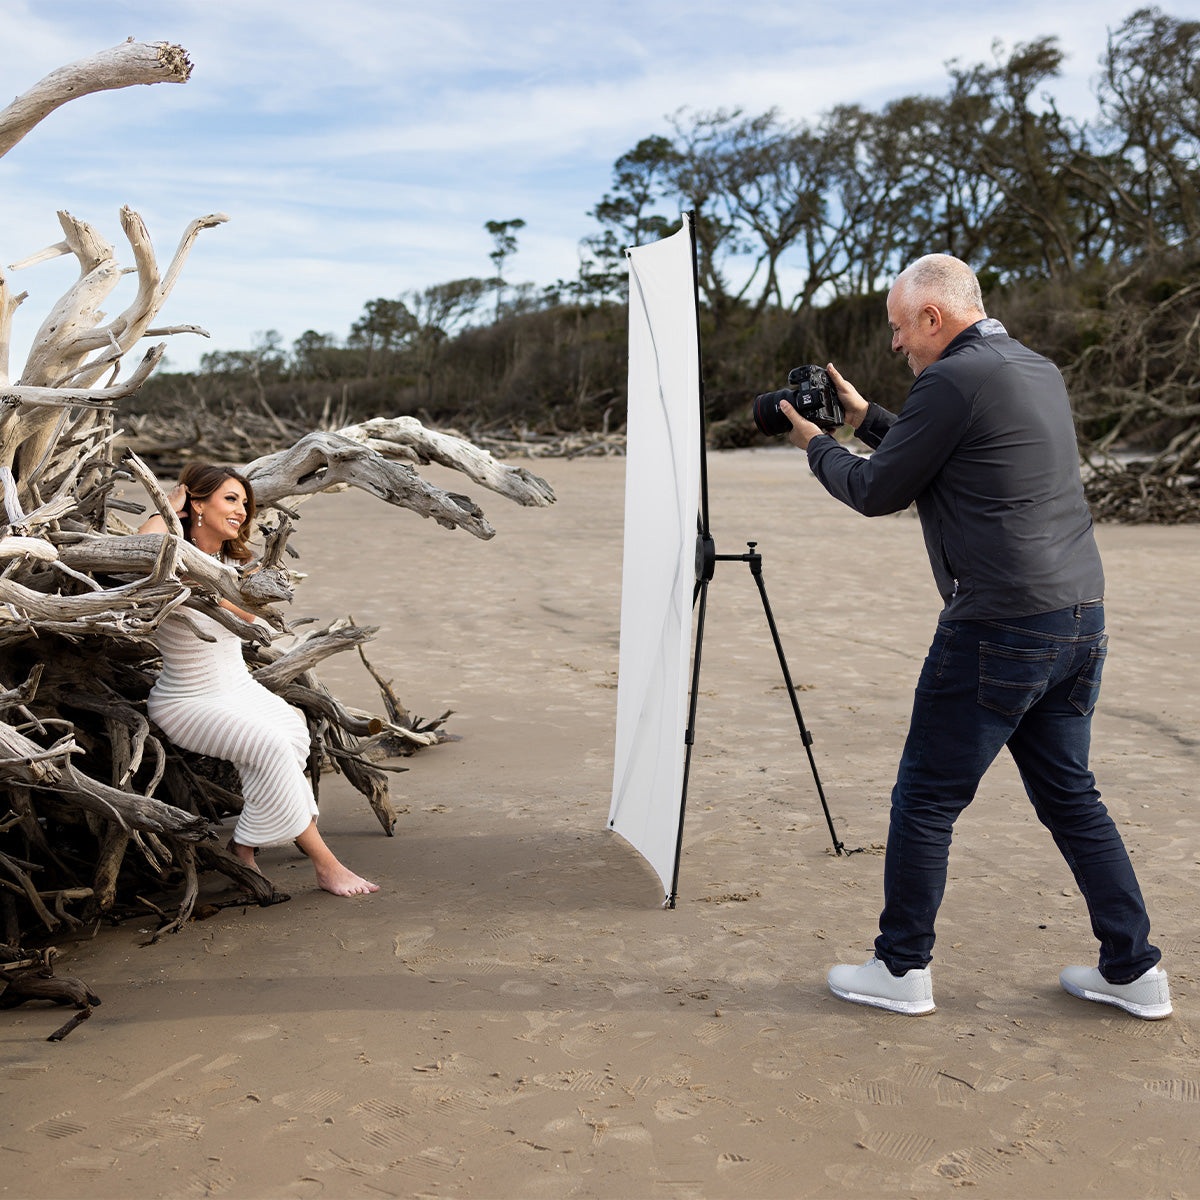 Model being photographed by Sal Cincotta on the beach using the Fusion light control system diffusion fabric